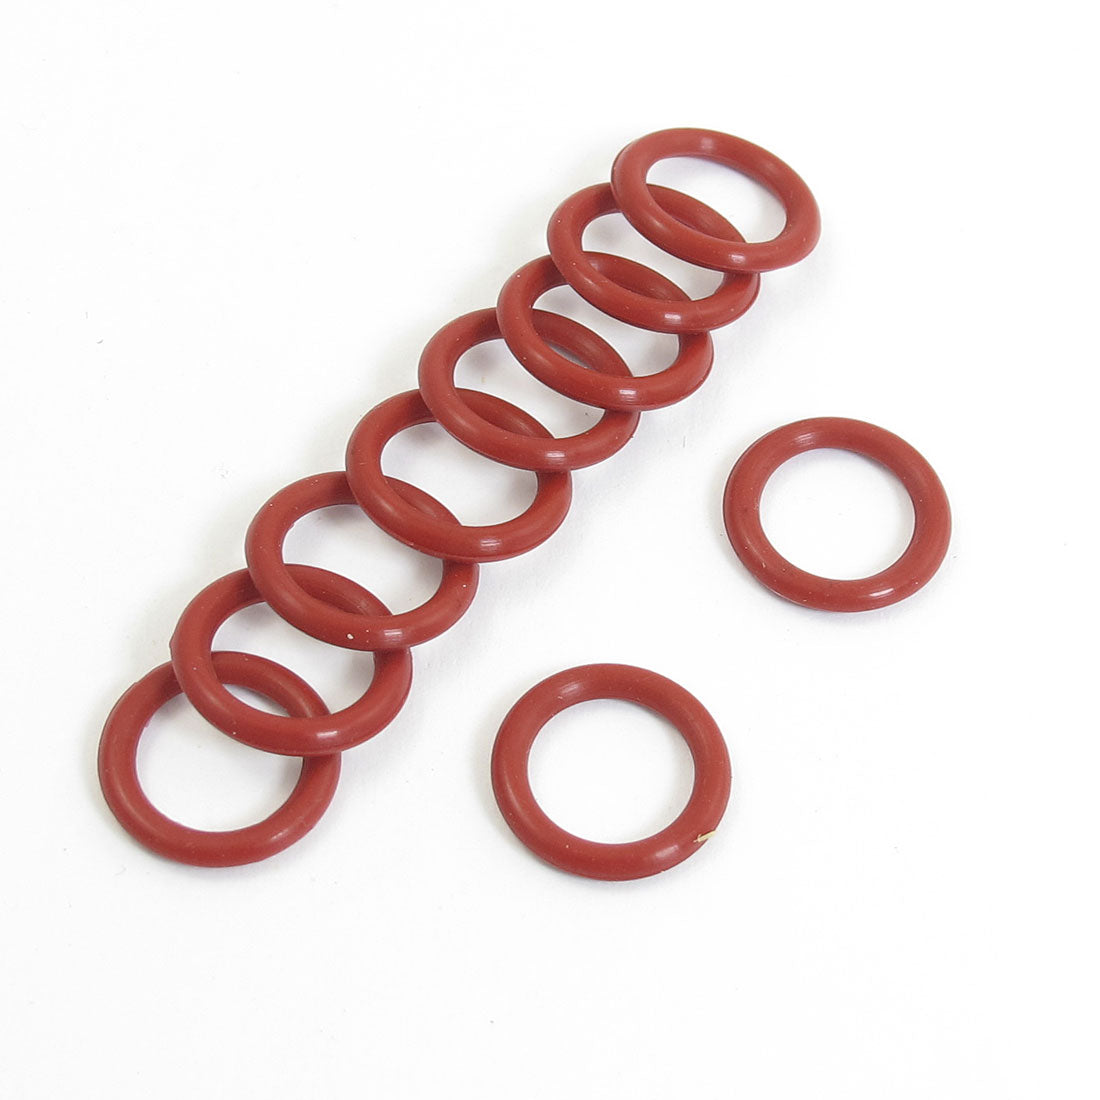 uxcell Uxcell 10 Pcs Red Rubber 16mm x 2.5mm Oil Seal O Rings Gaskets Washers